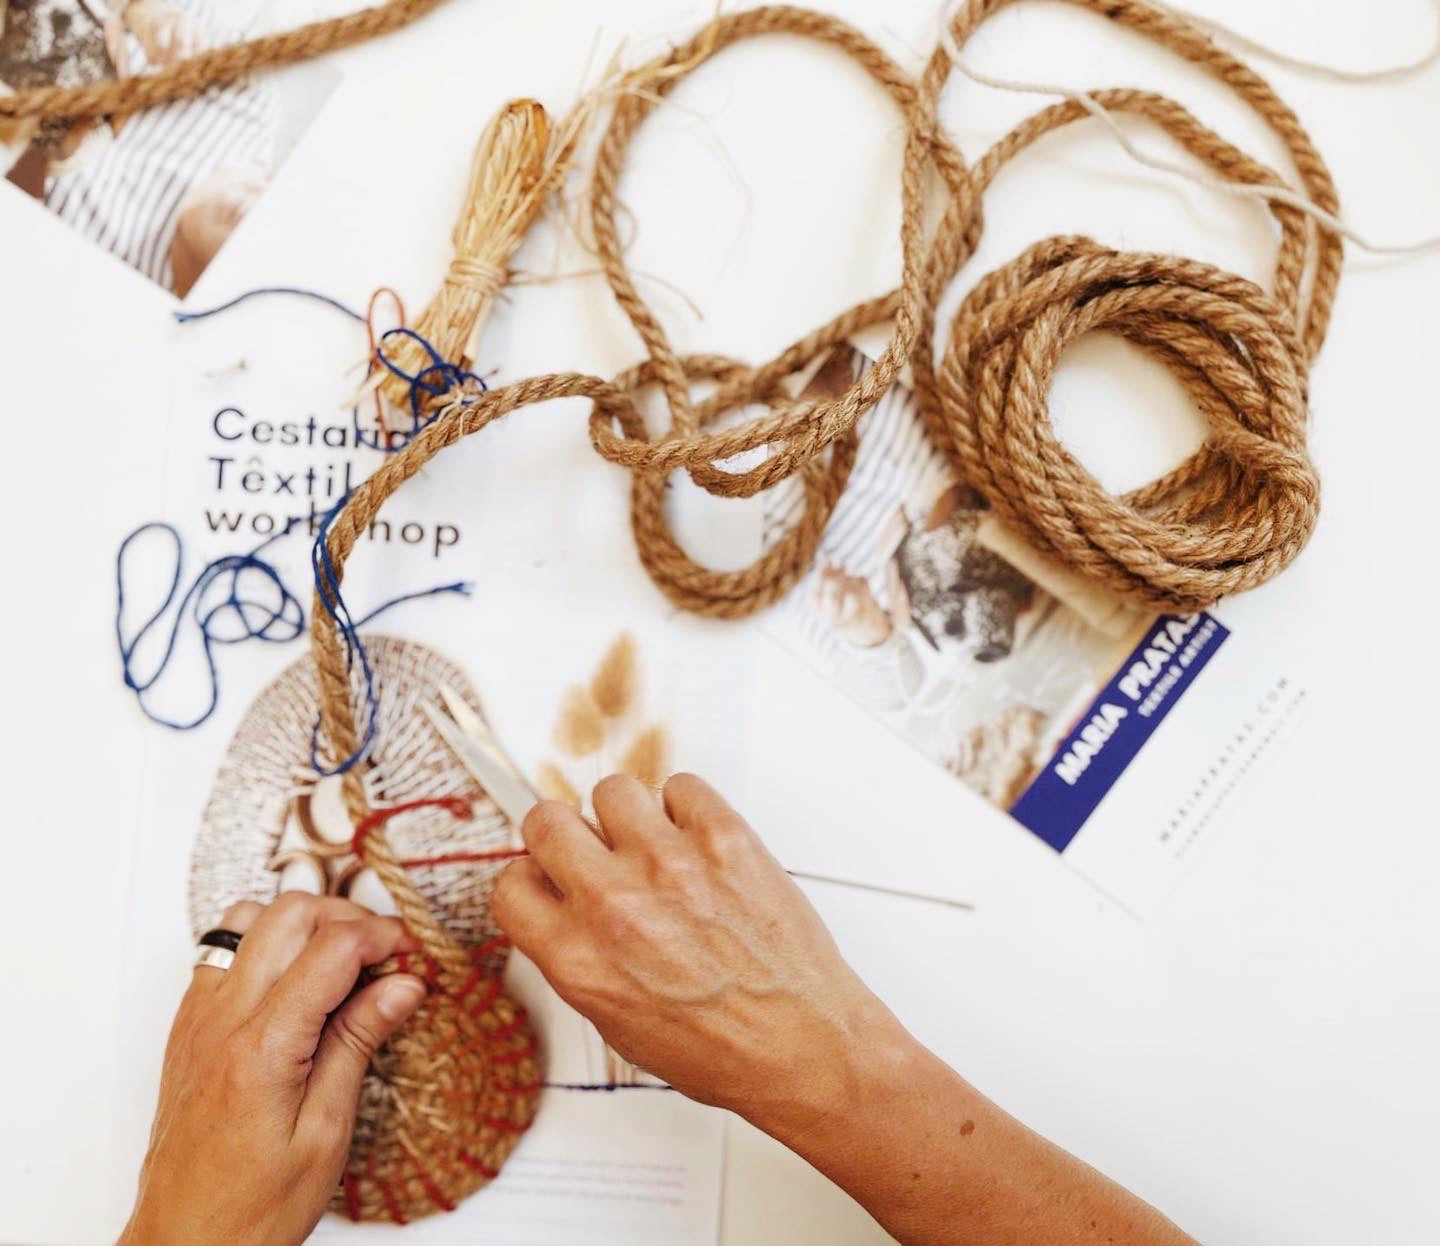 Textile Basketry Workshop with Maria in Algarve, Portimão, Portugal by subcultours